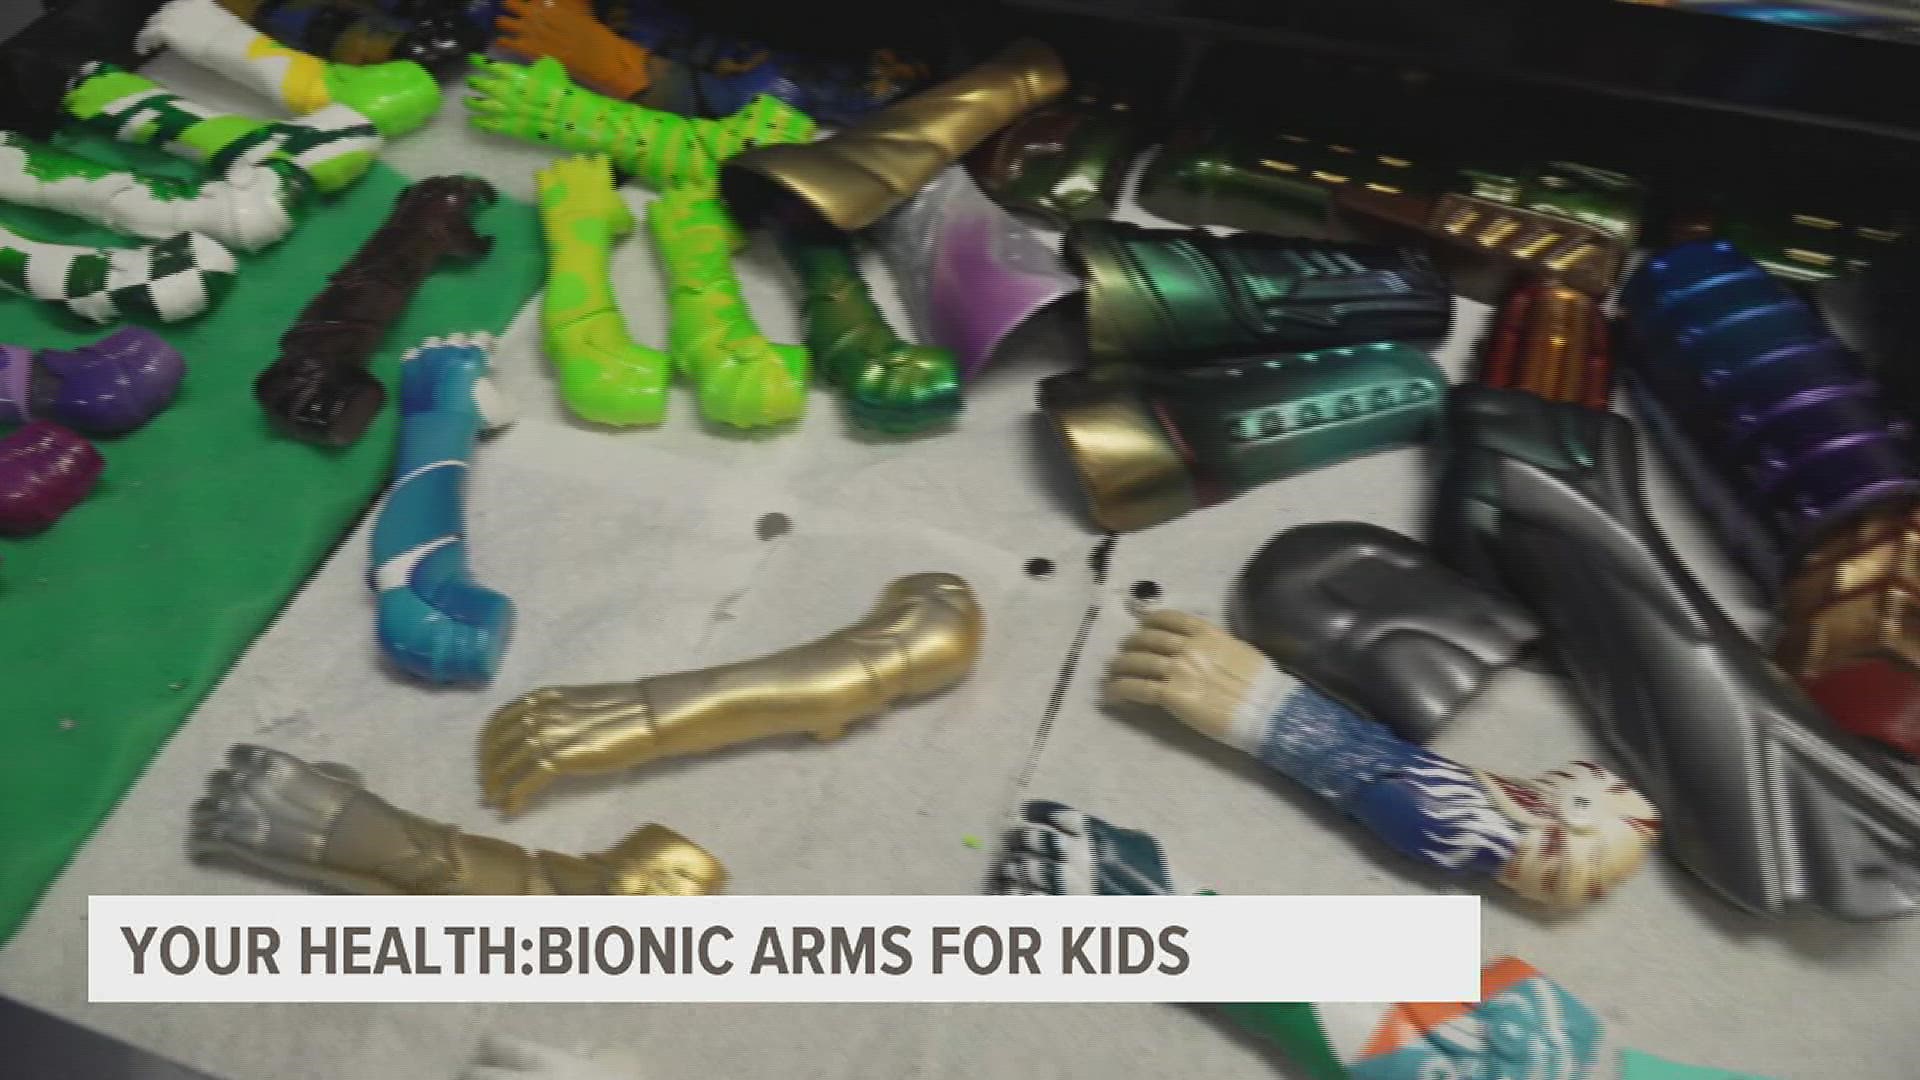 Researchers at the University of Central Florida developed bionic arms for kids who are born without. Those scientists developed a spin-off company called Limbi.